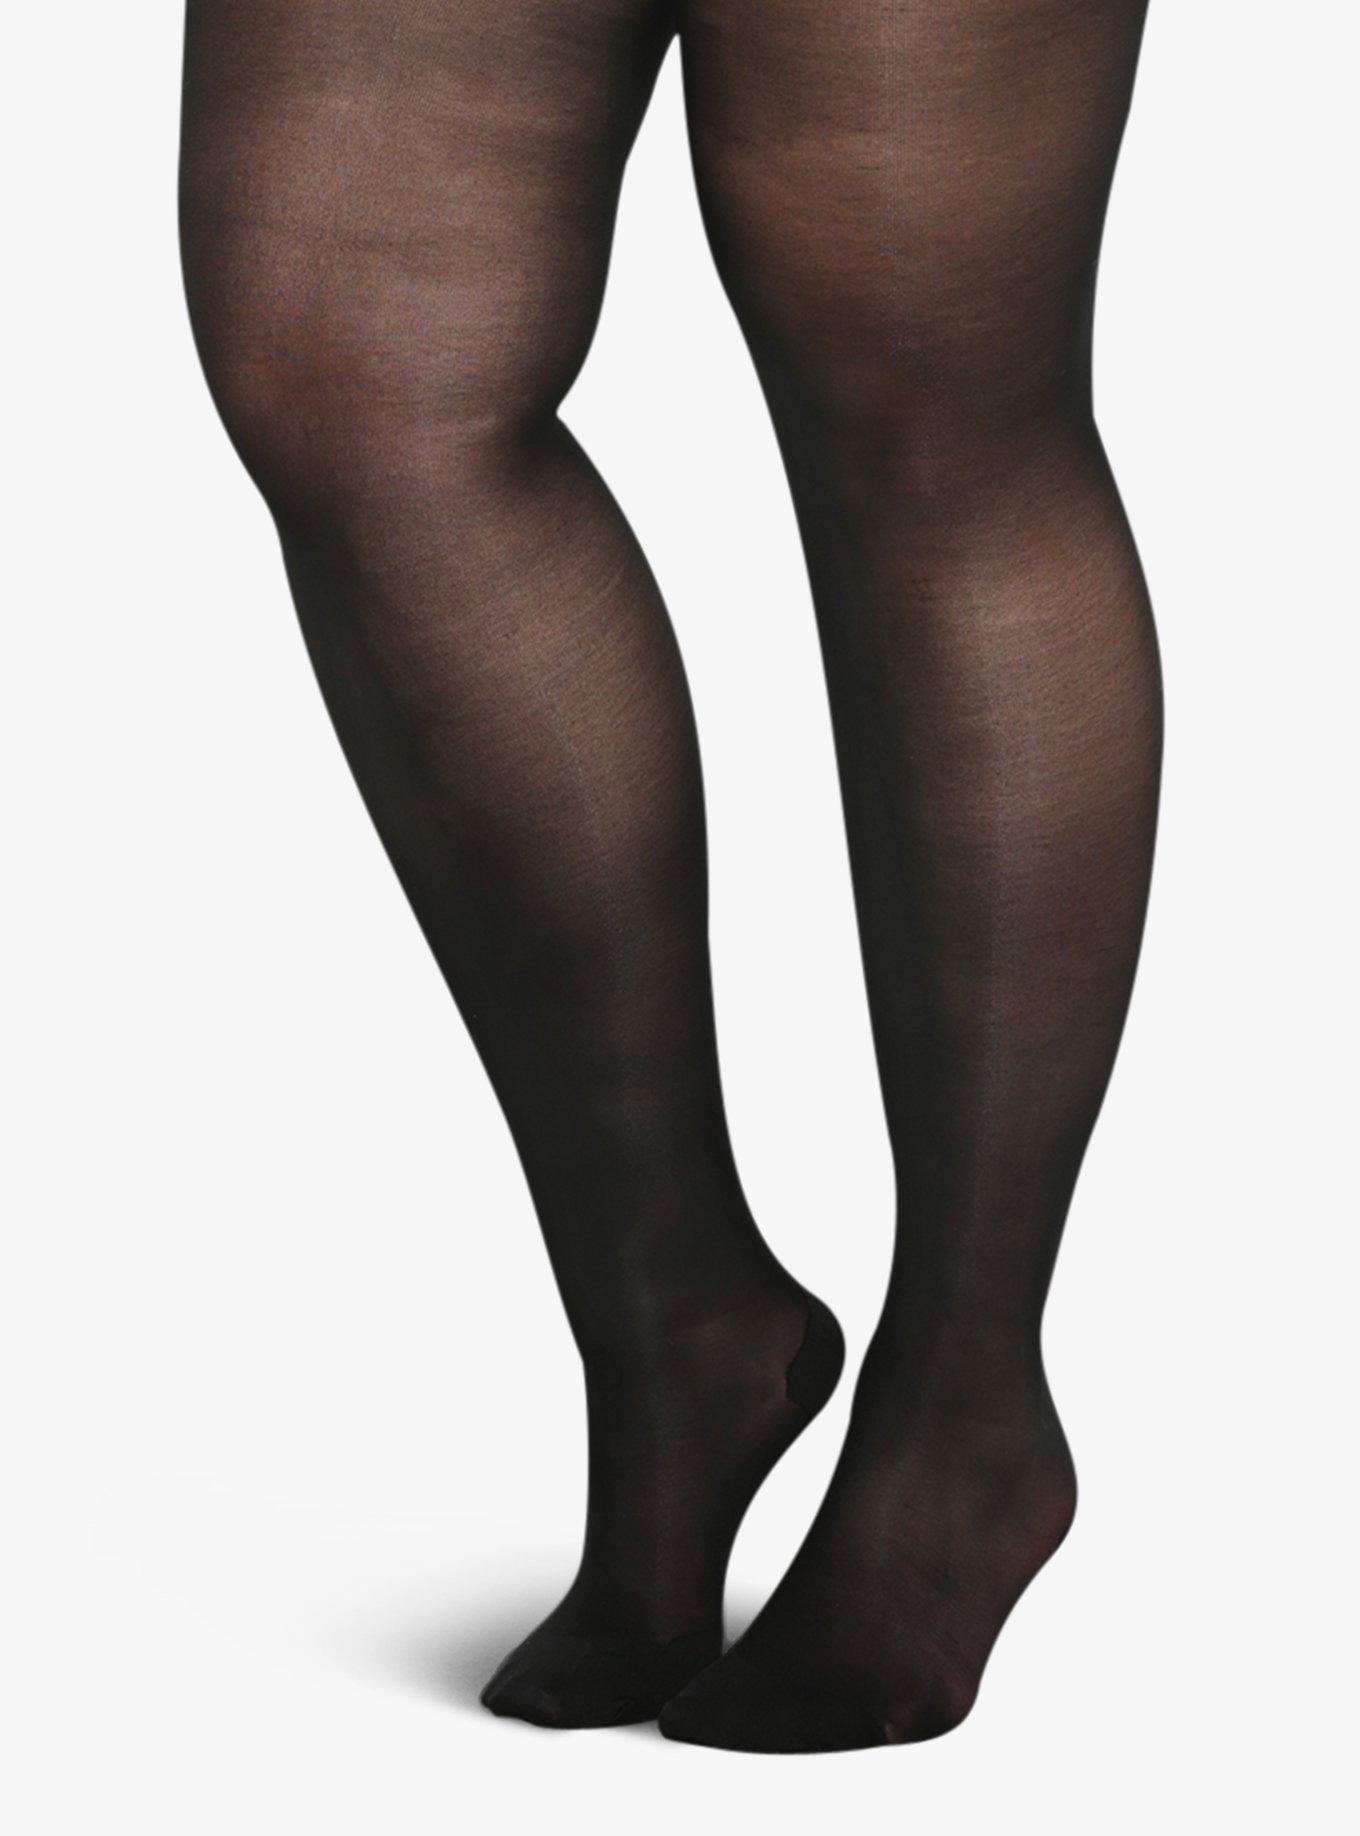 Blue Tights for Women Soft and Durable Opaque Pantyhose Tights Available in  Plus Size -  Canada